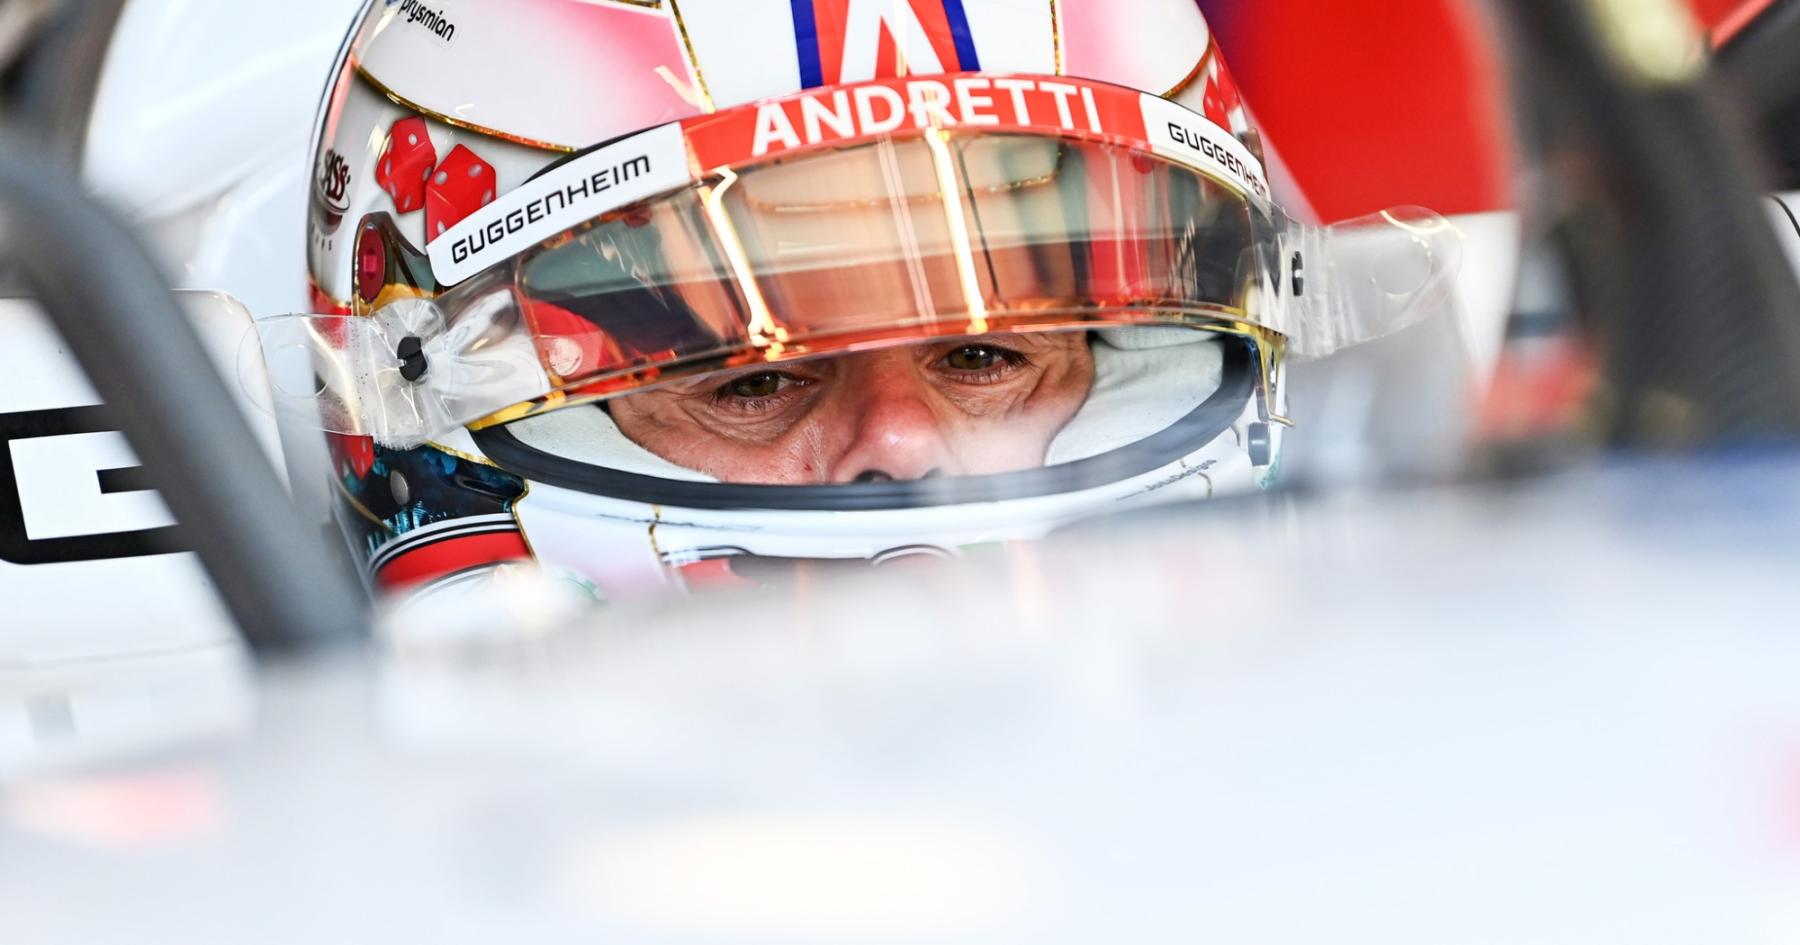 Crucial Insights: Andretti's Conditions for Nato's Contract Extension Revealed